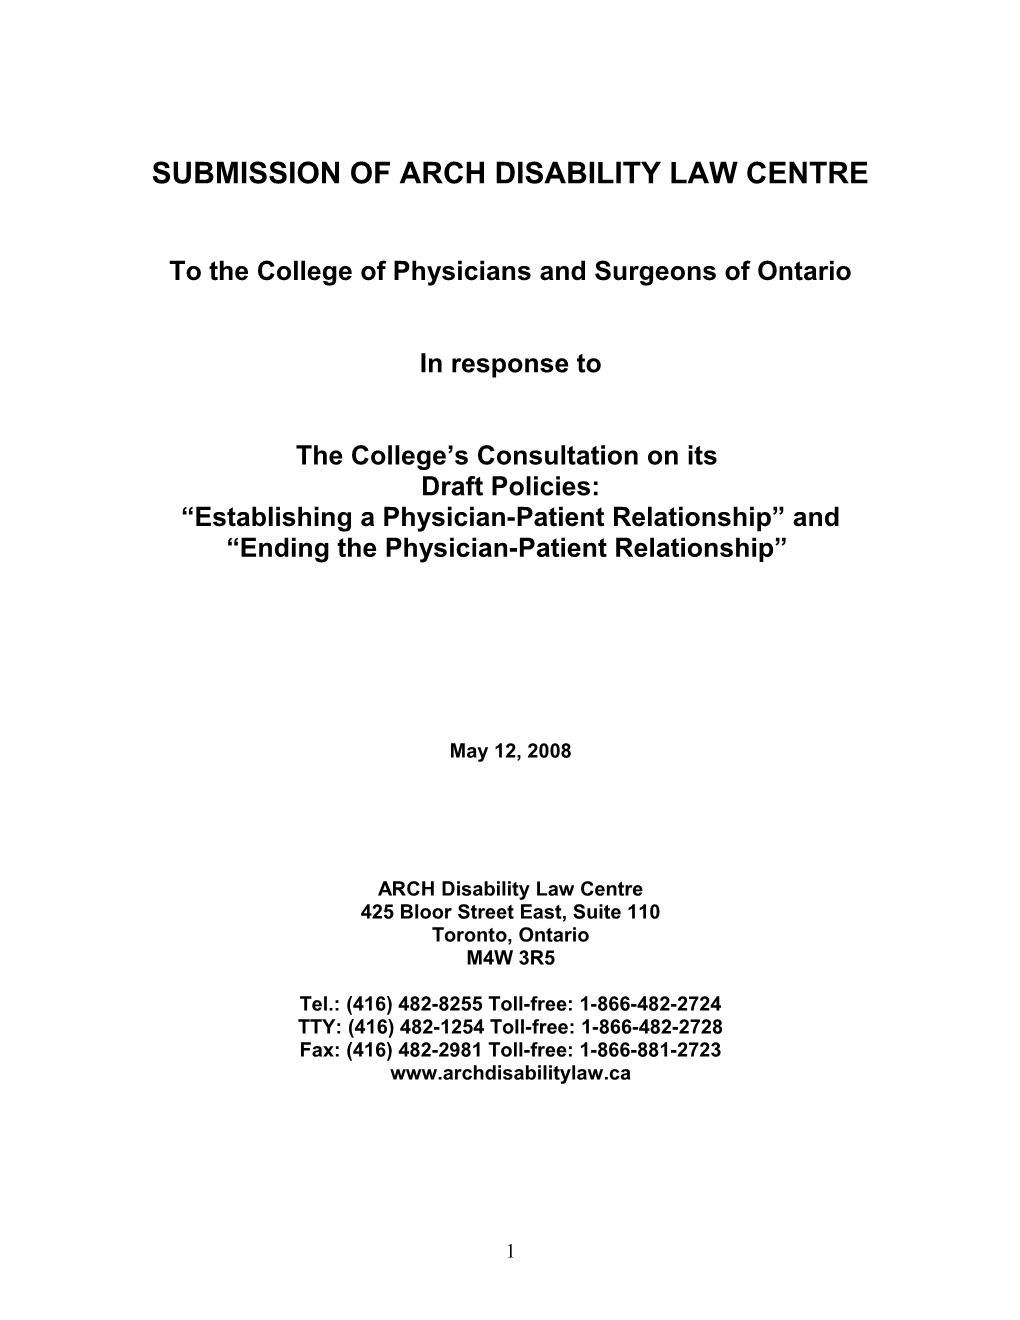 Submission of Arch Disability Law Centre